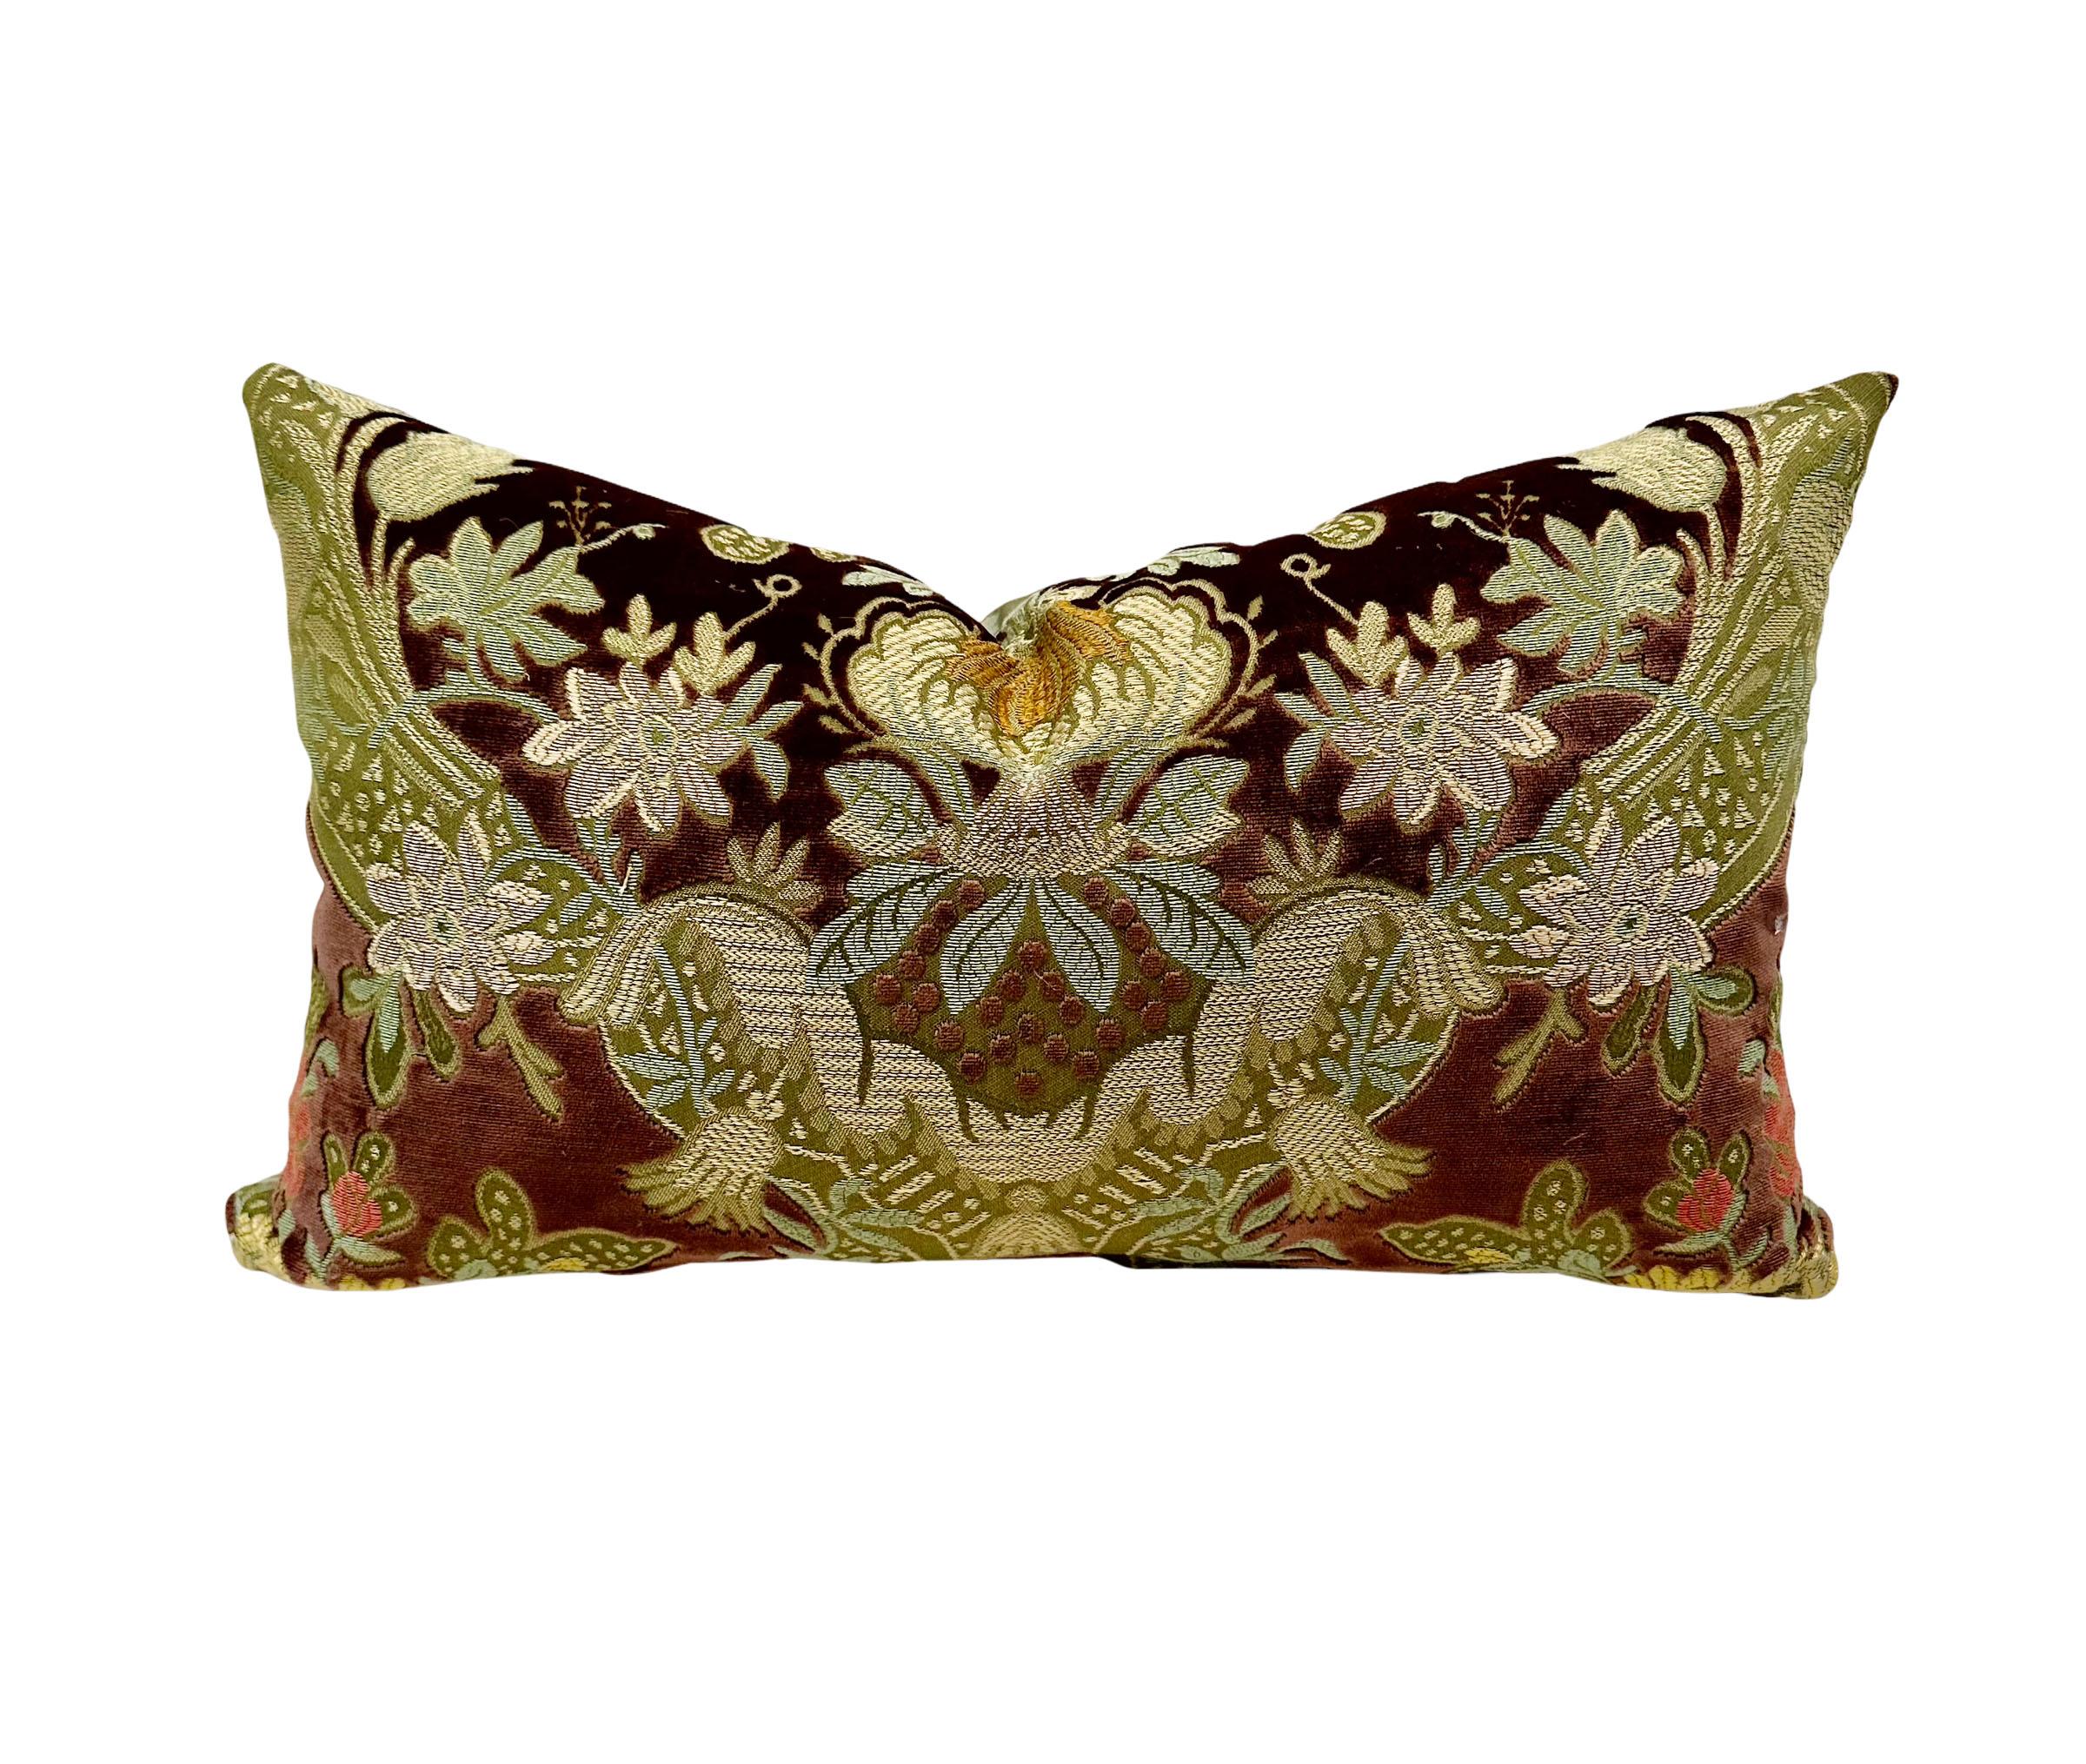 Old World Weavers cut velvet pillow from the 1960s. Stuffed with down and has a zipper for easy cleaning. 